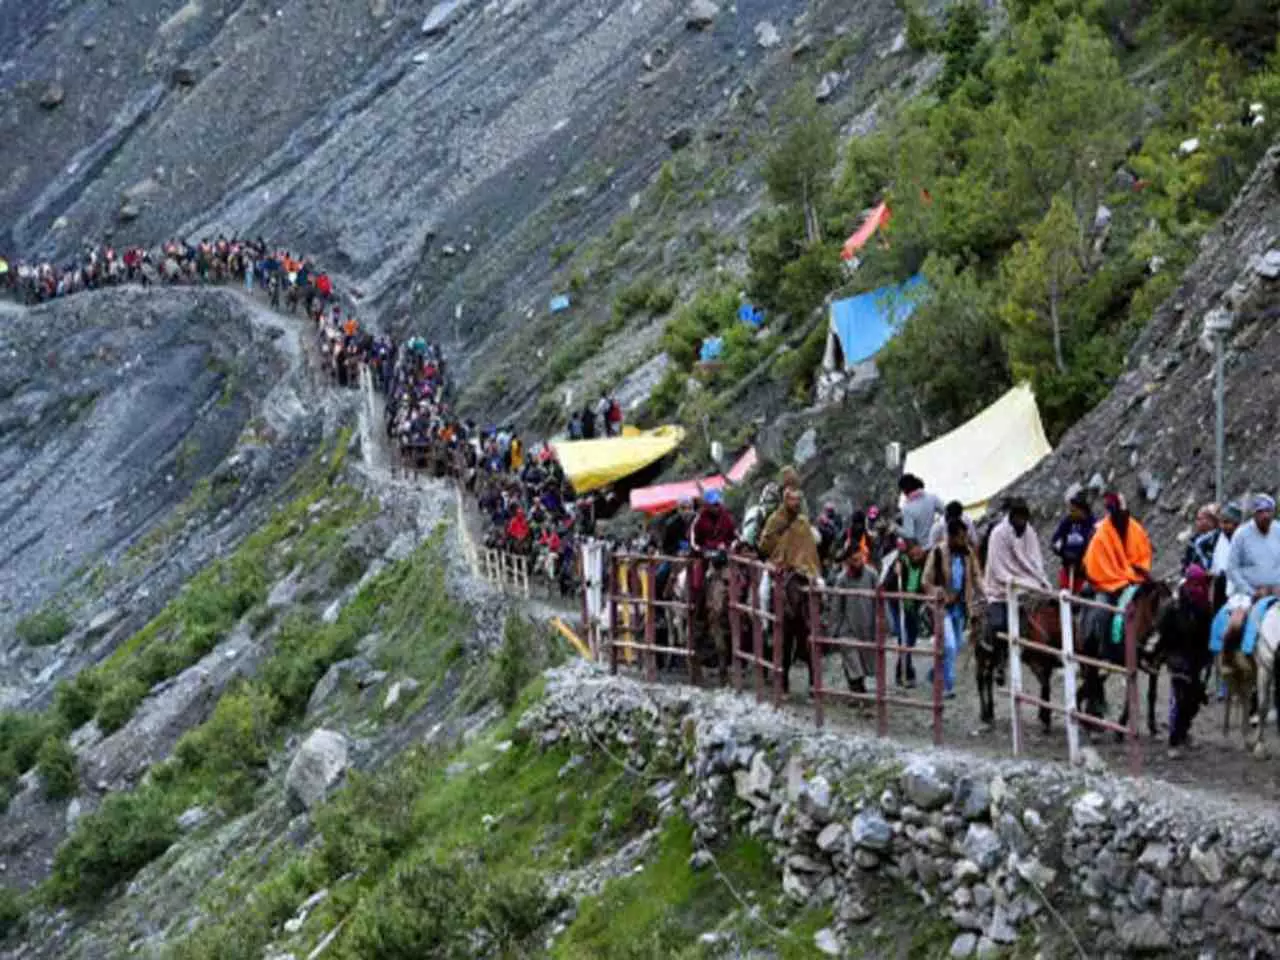 Amarnath Yatra resumes with a 'smart' makeover - NewZNew